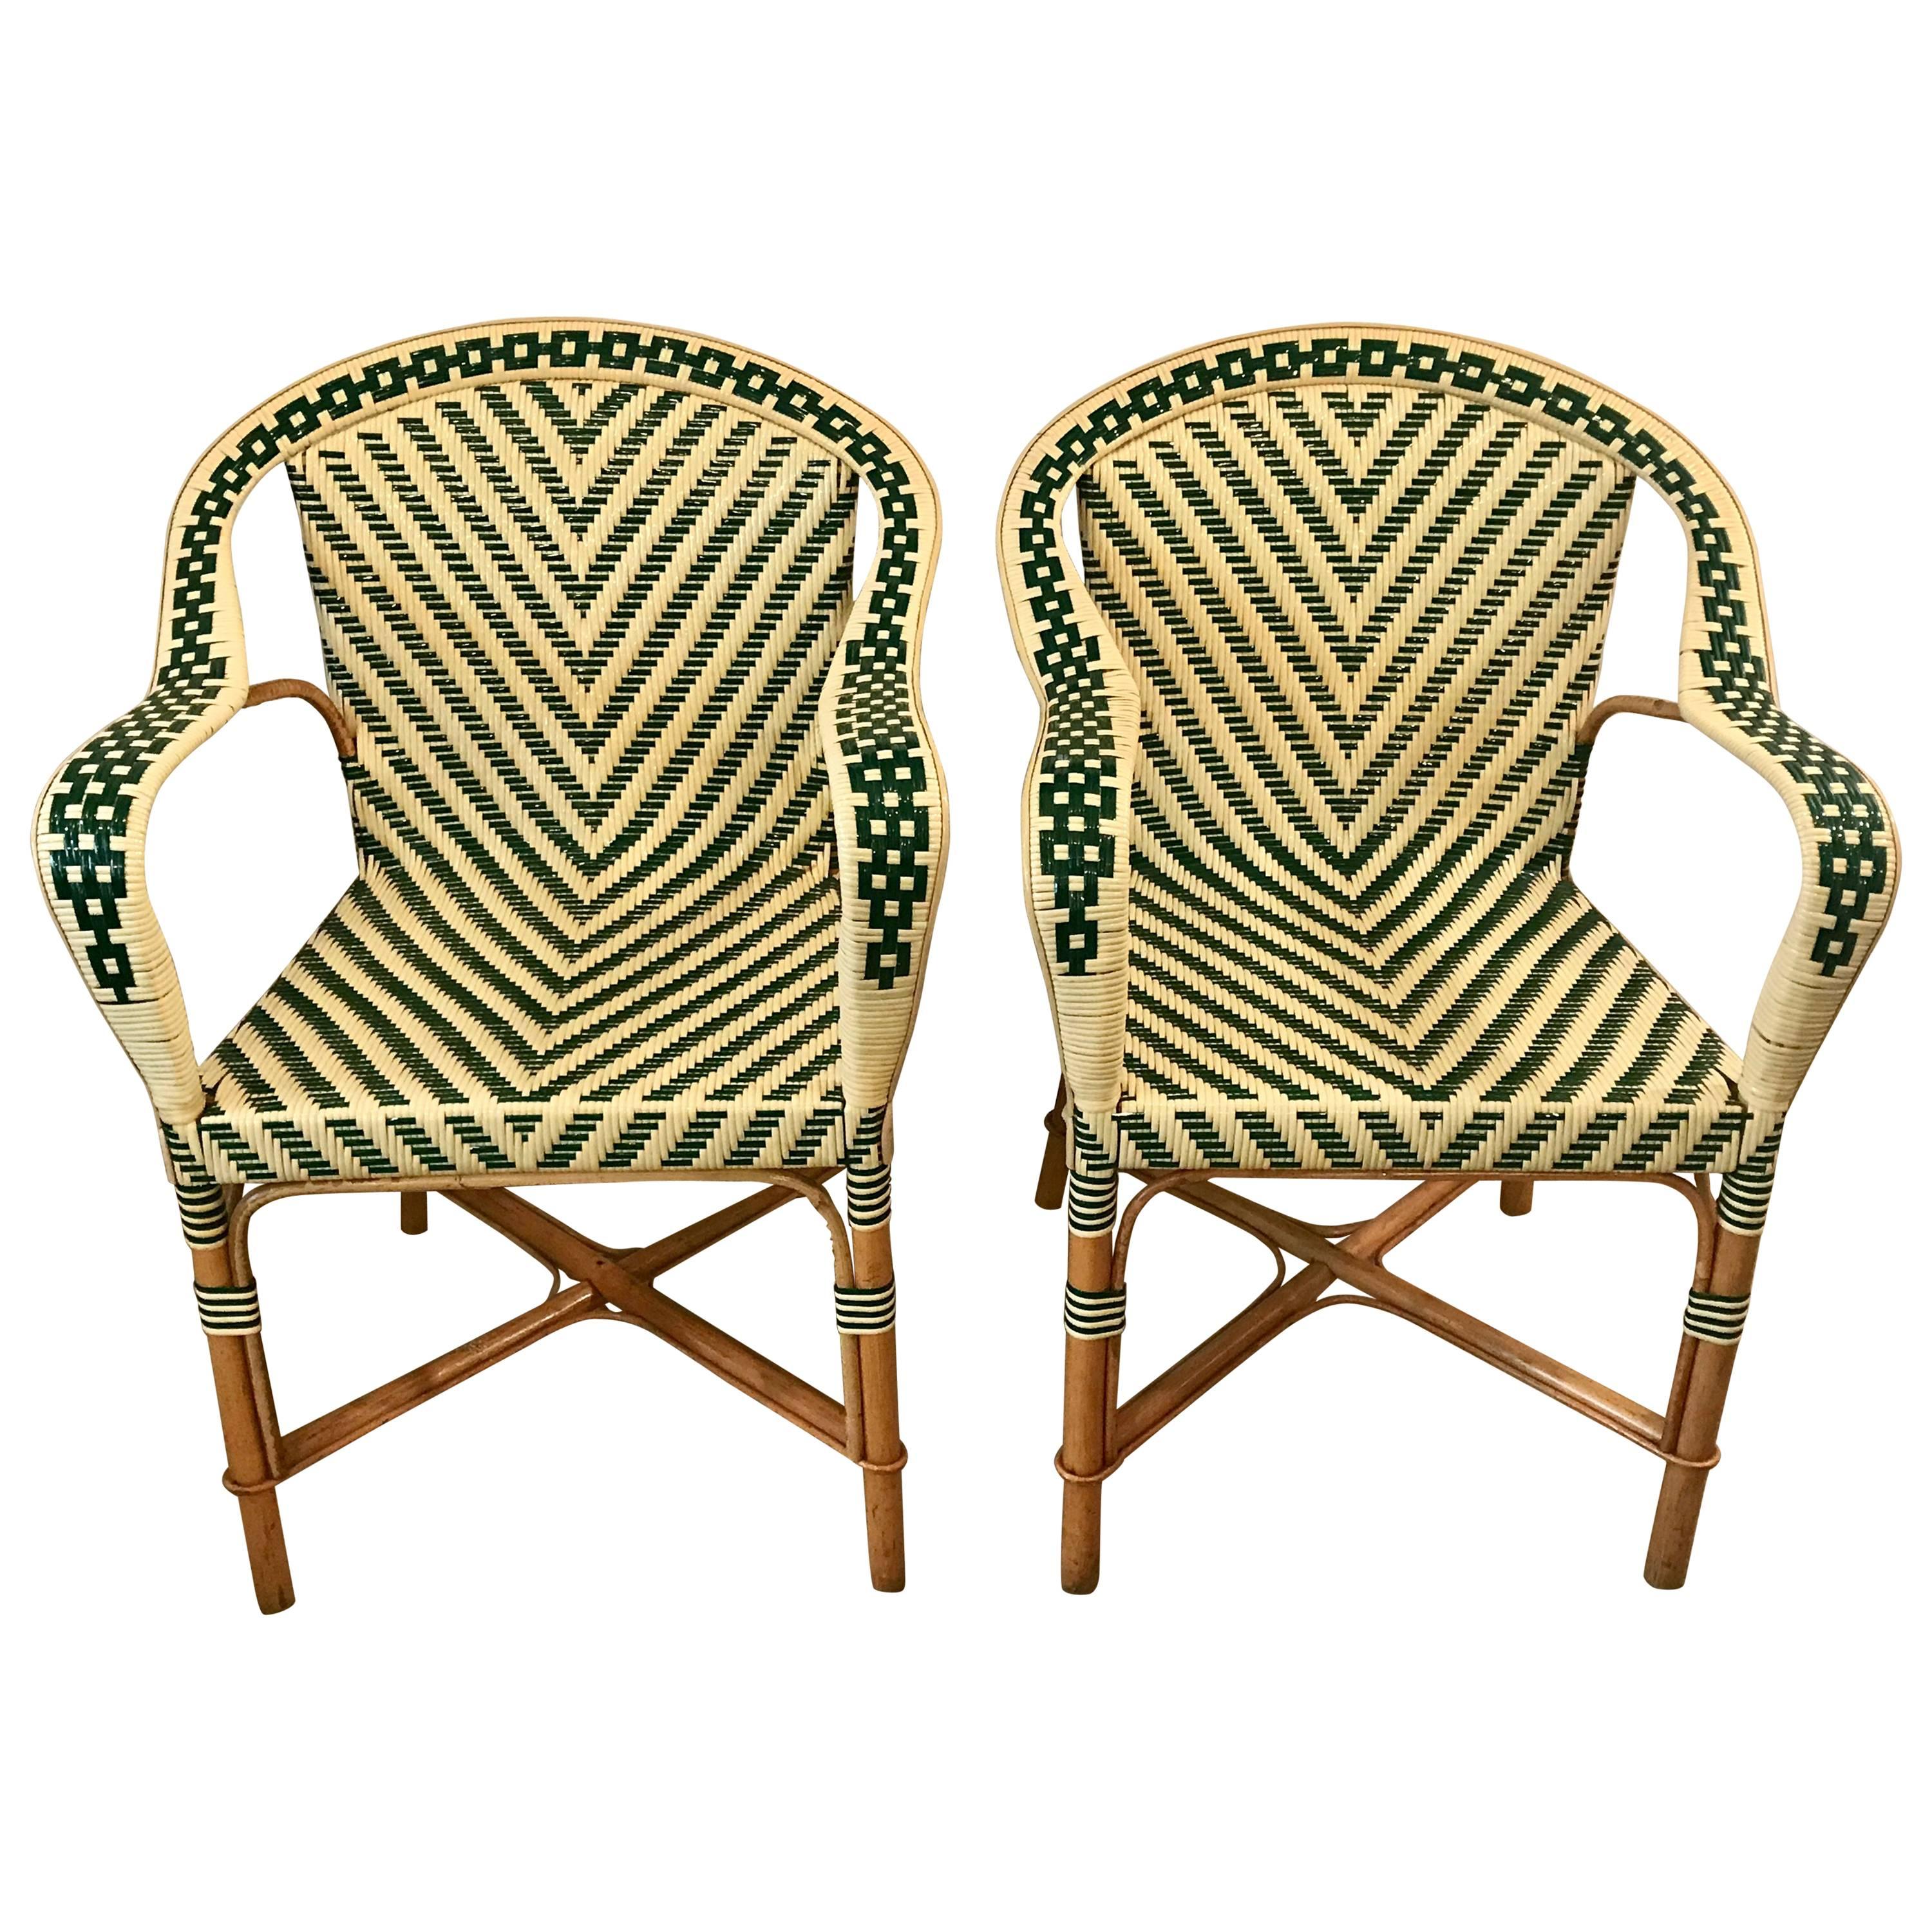 Pair of Mid Century French Armchairs, Two-Tone Wicker Rattan Chevron Pattern